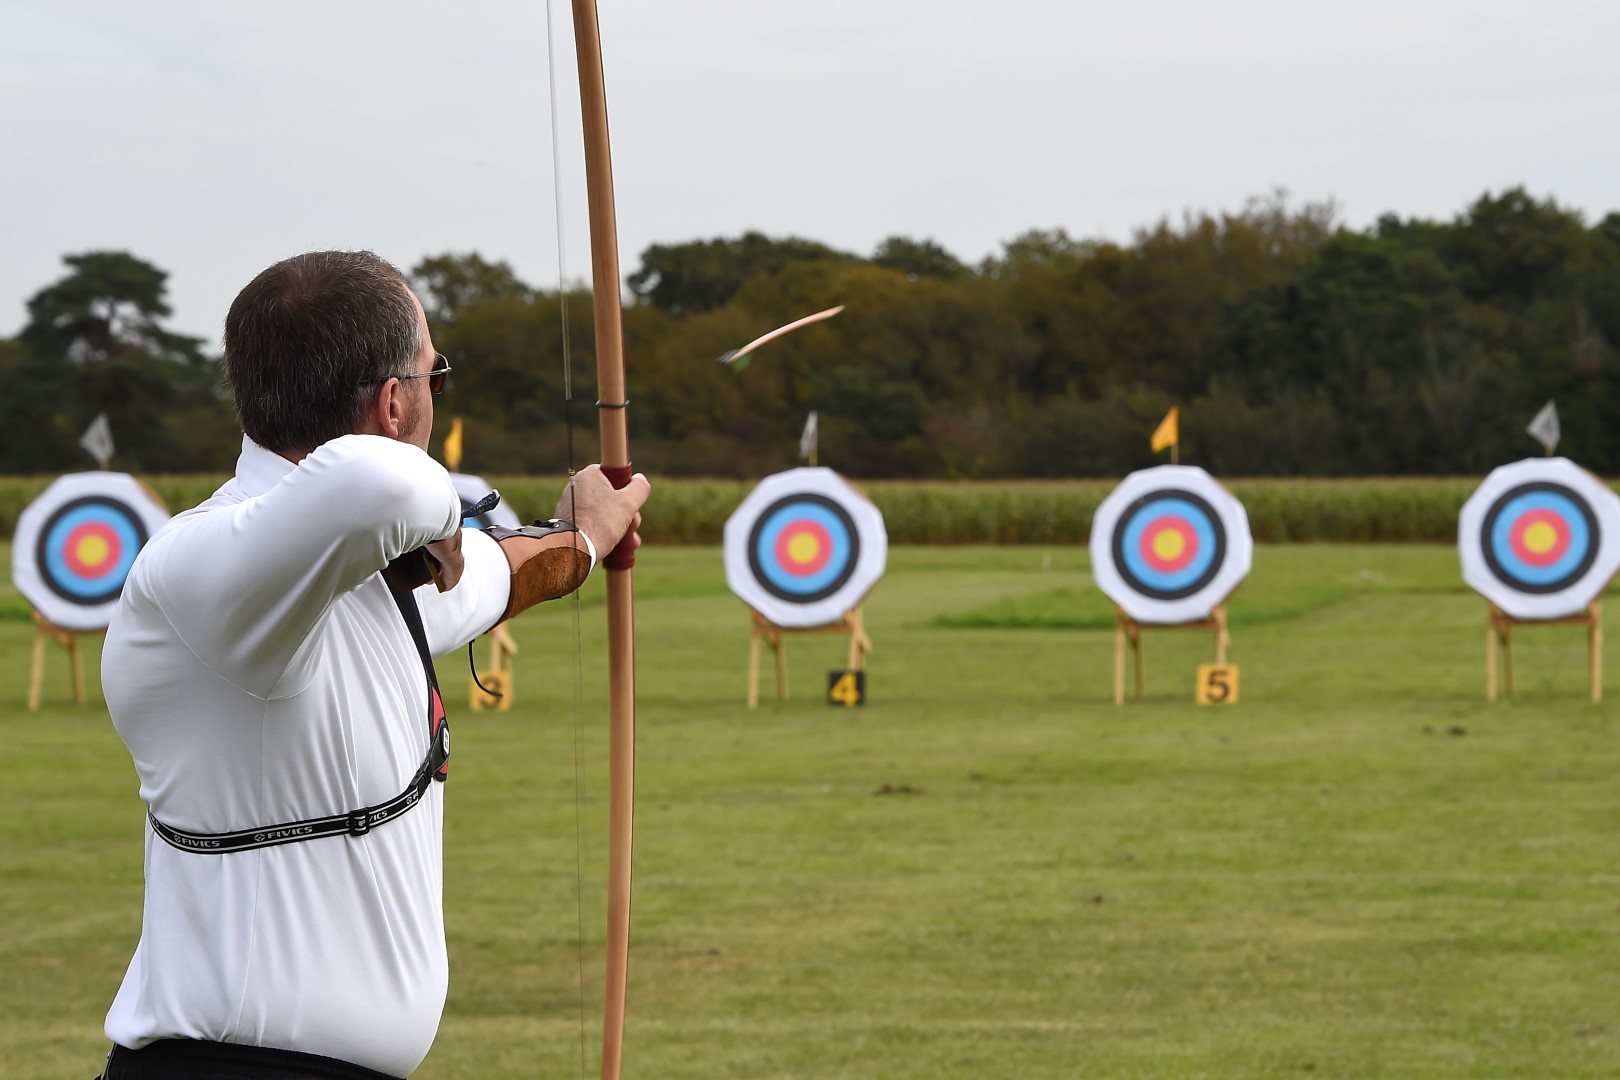 7-Reasons-Why-You-Should-Target-Beginners